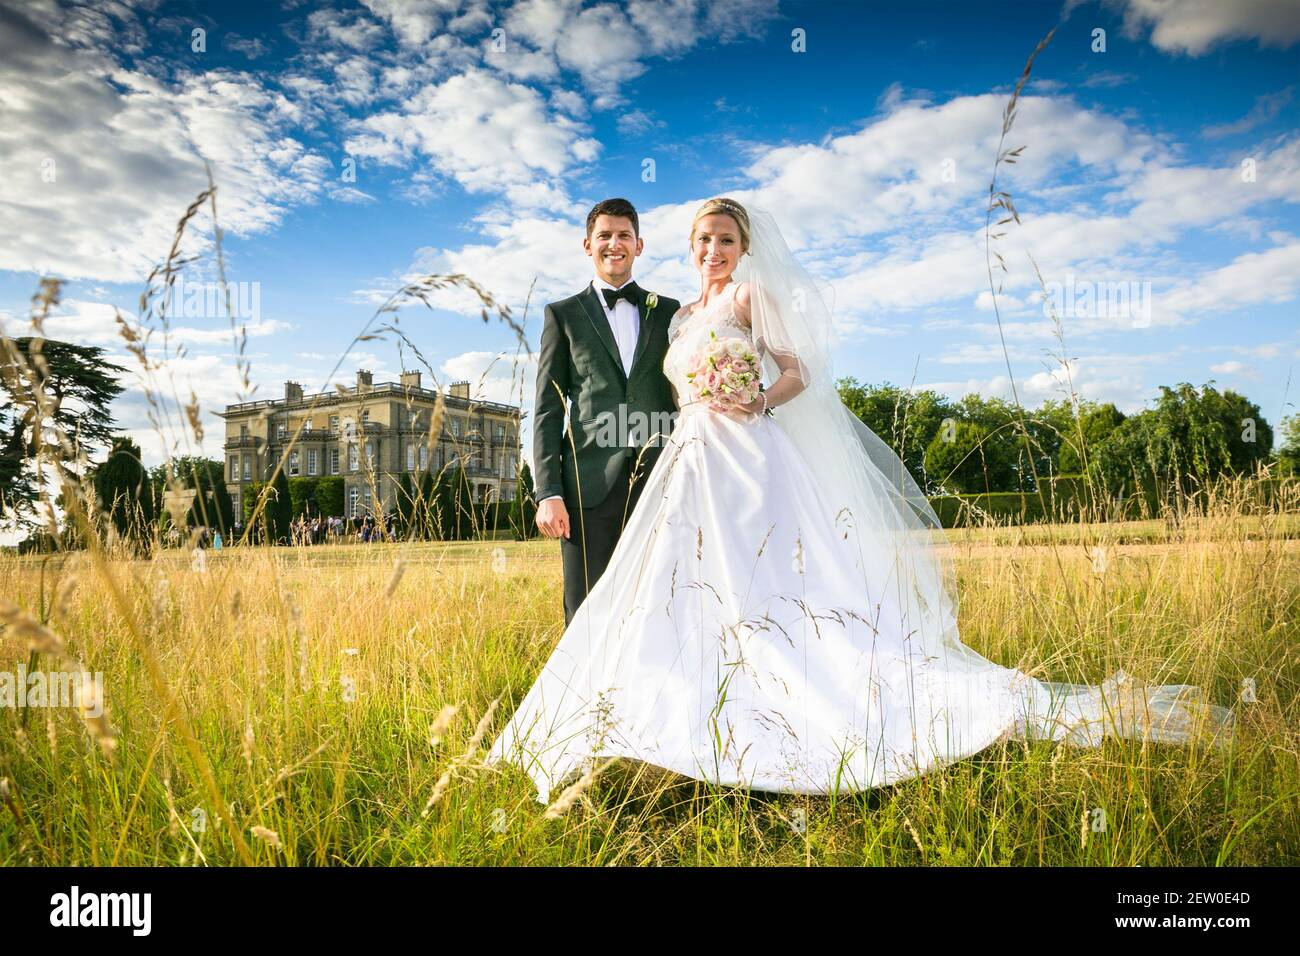 Bride and Bridegroom looking very happy and in love on their wedding day Stock Photo